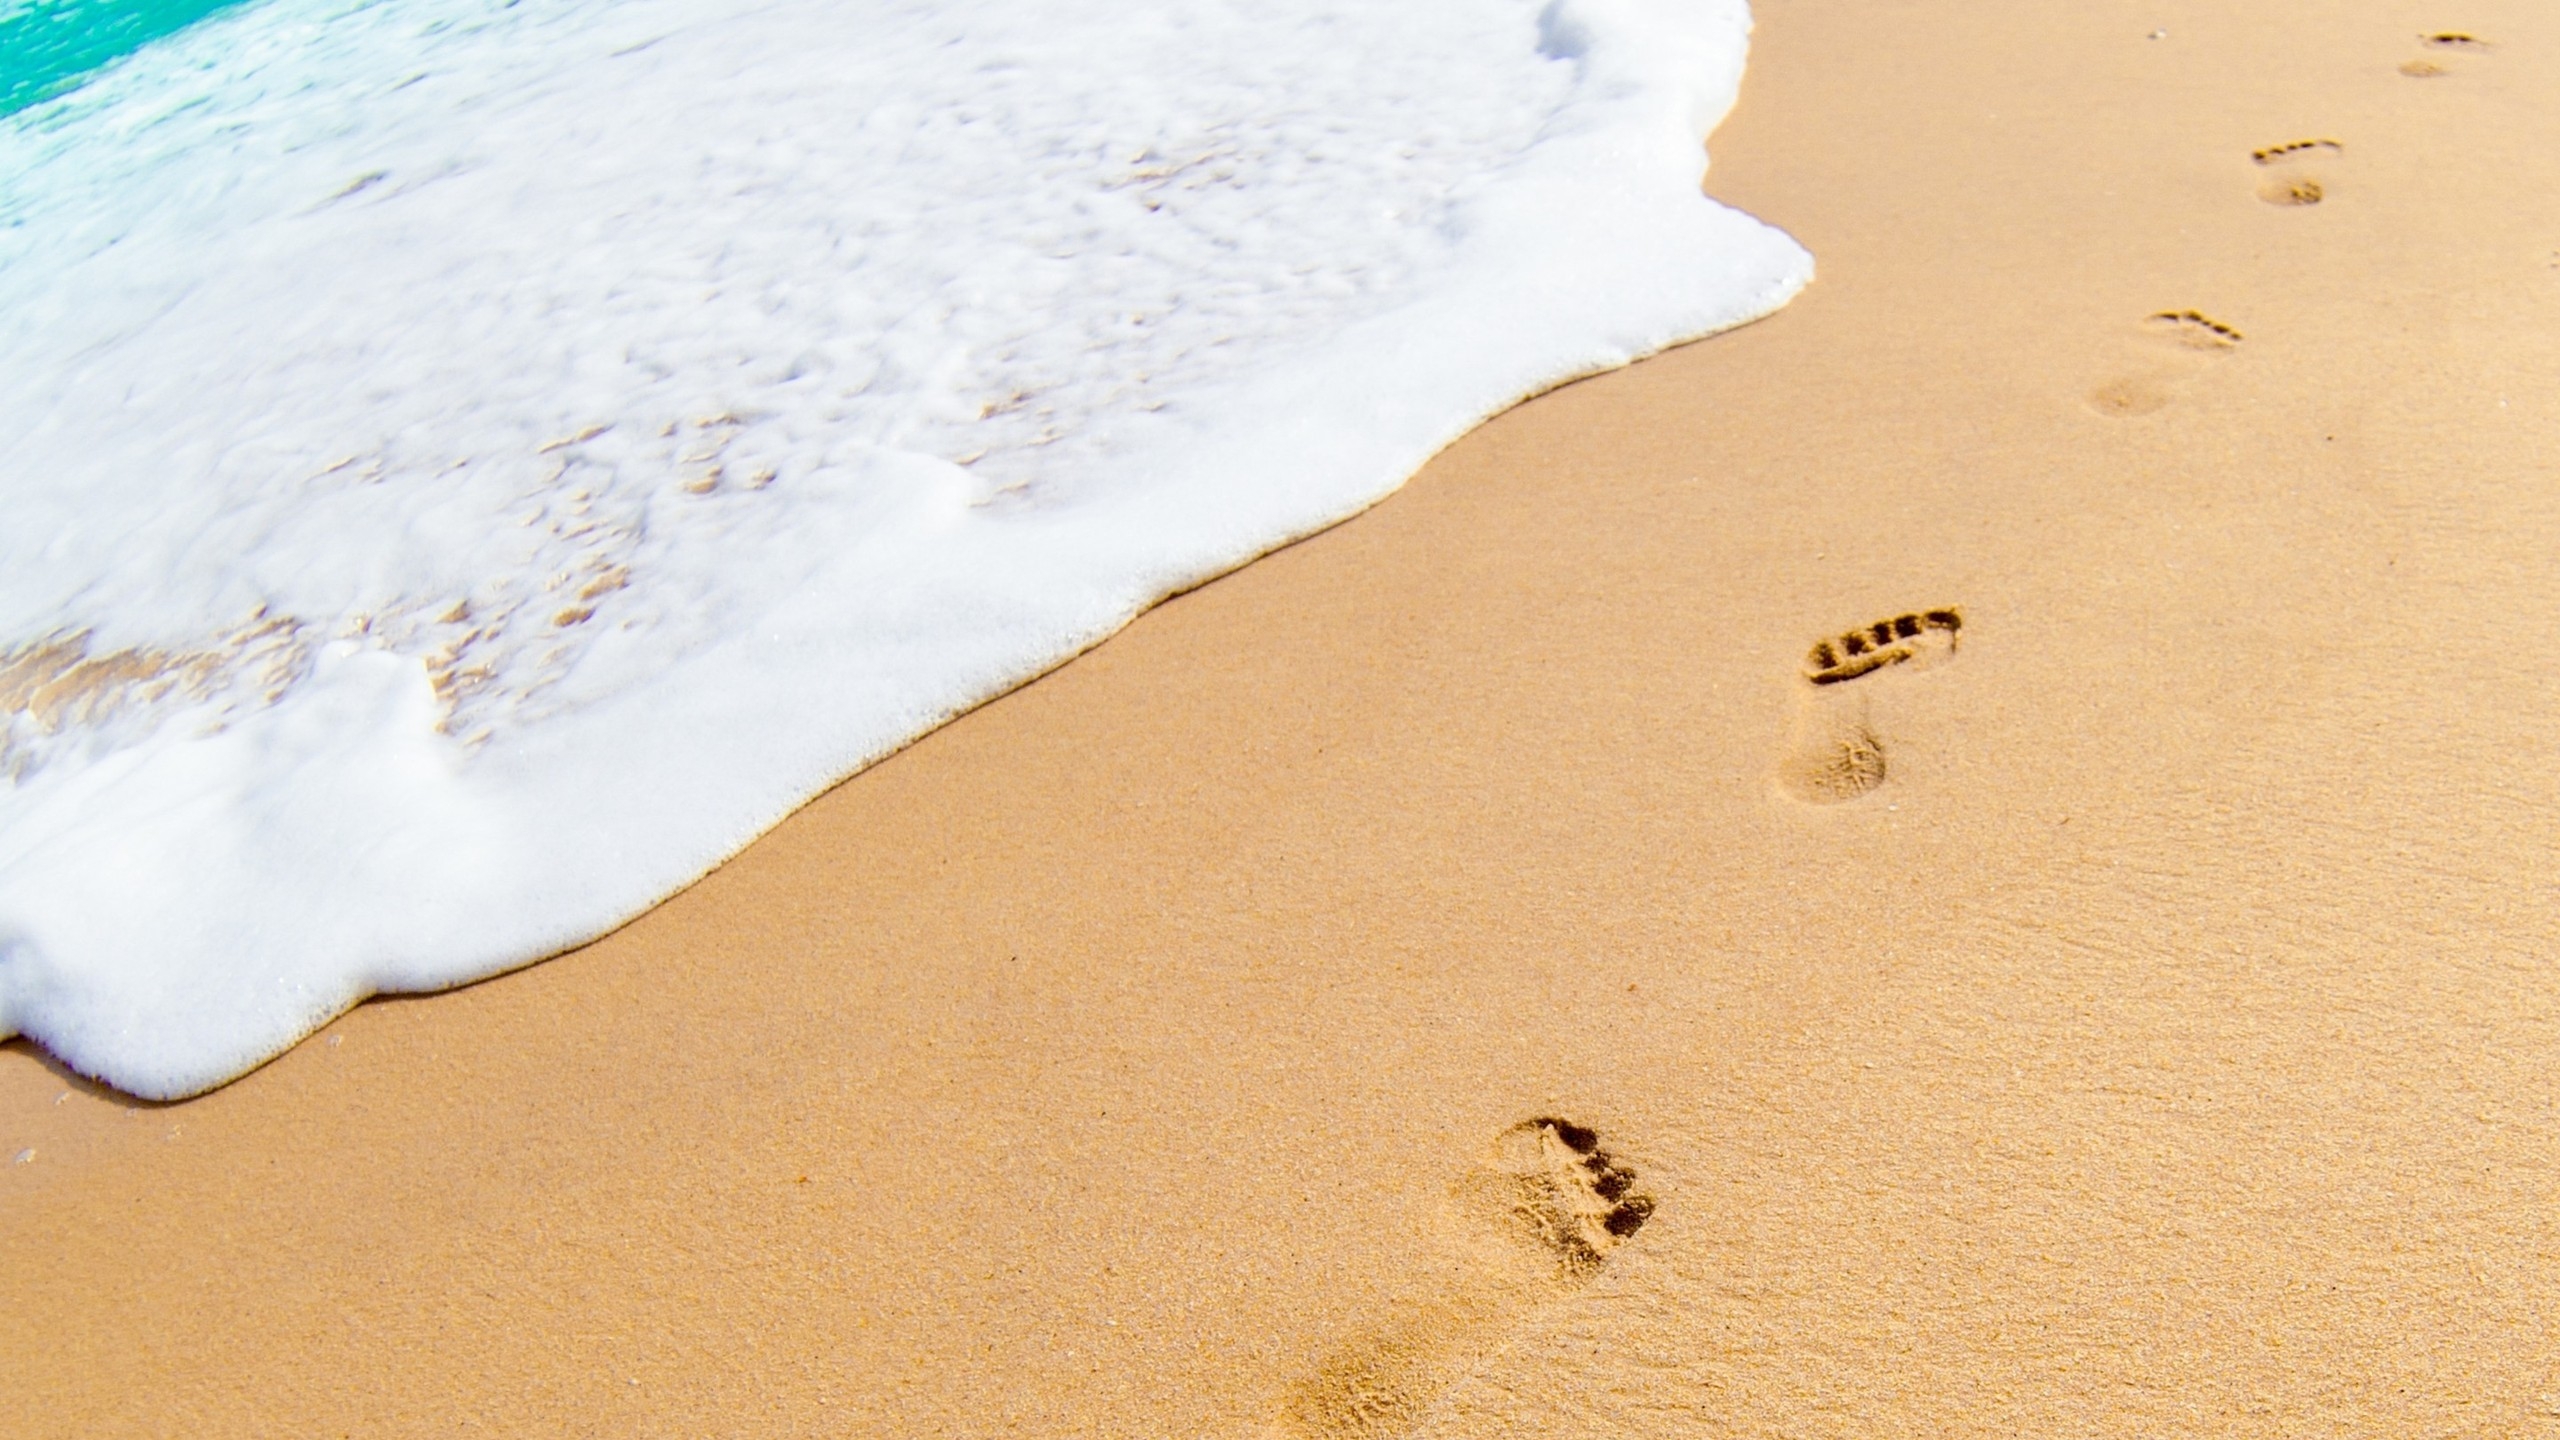 Footprints in the Sand for 2560x1440 HDTV resolution